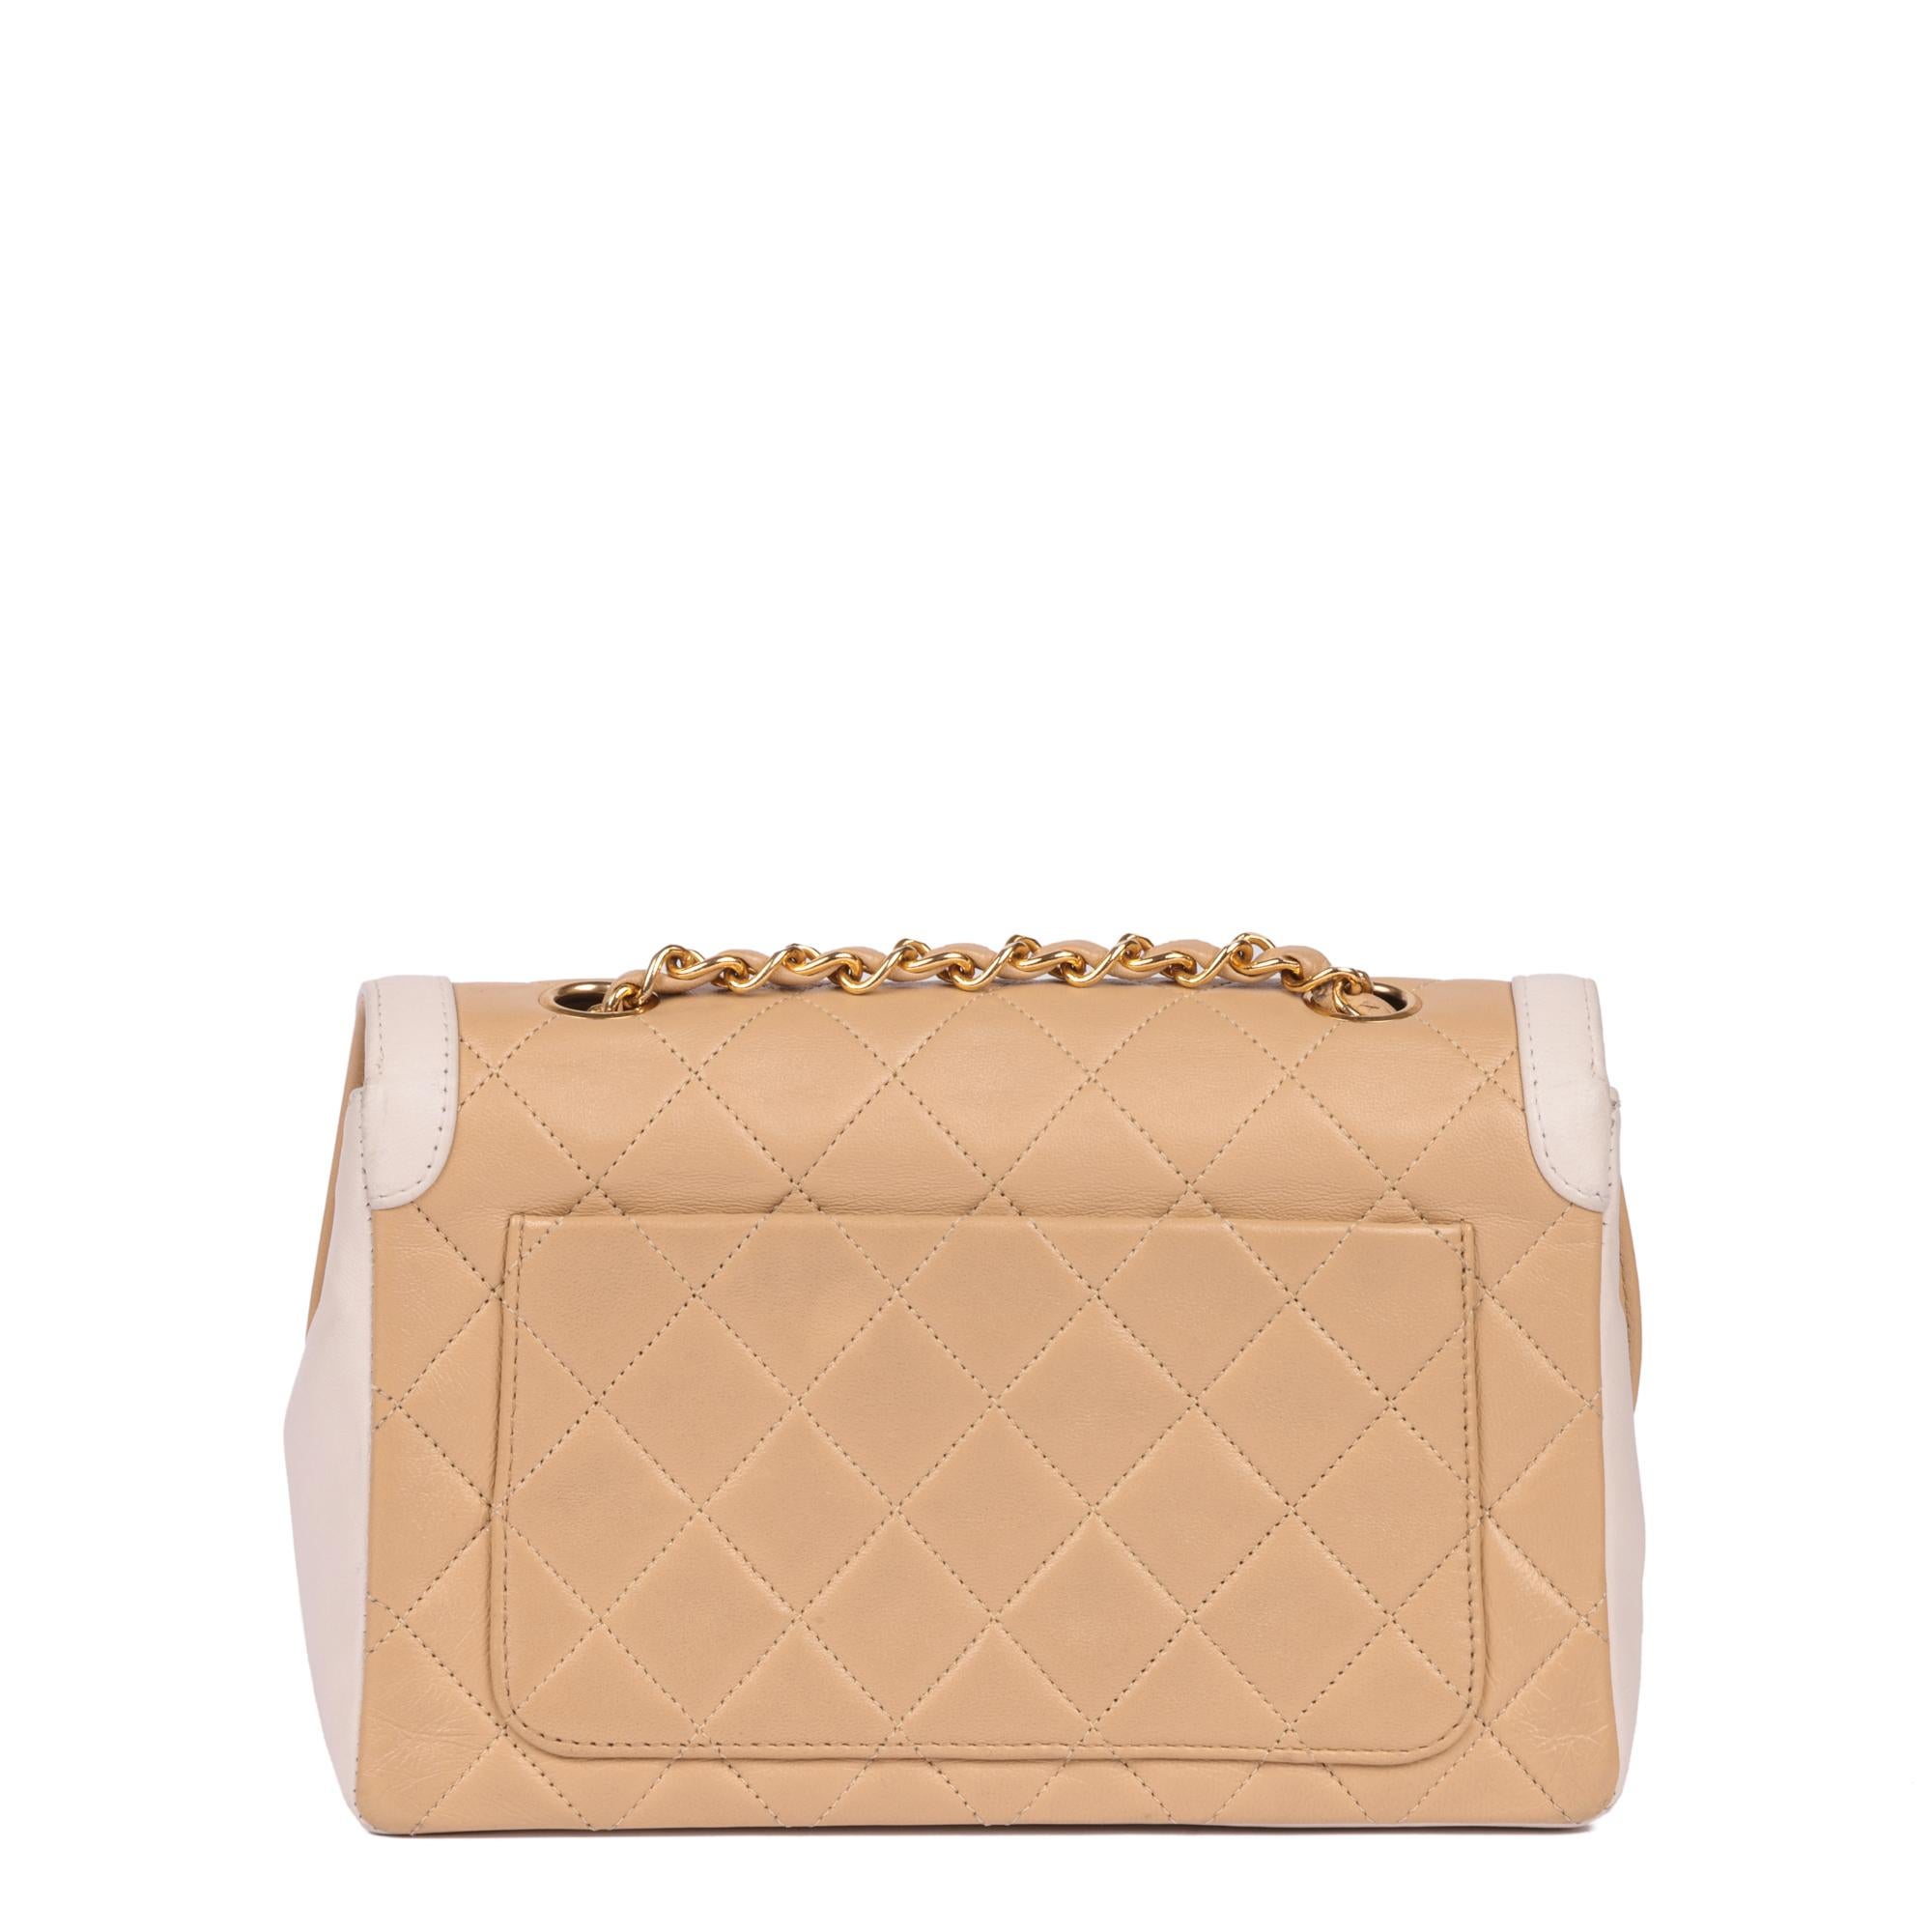 CHANEL Beige & White Quilted Lambskin Vintage Mini Classic Single Flap Bag 1